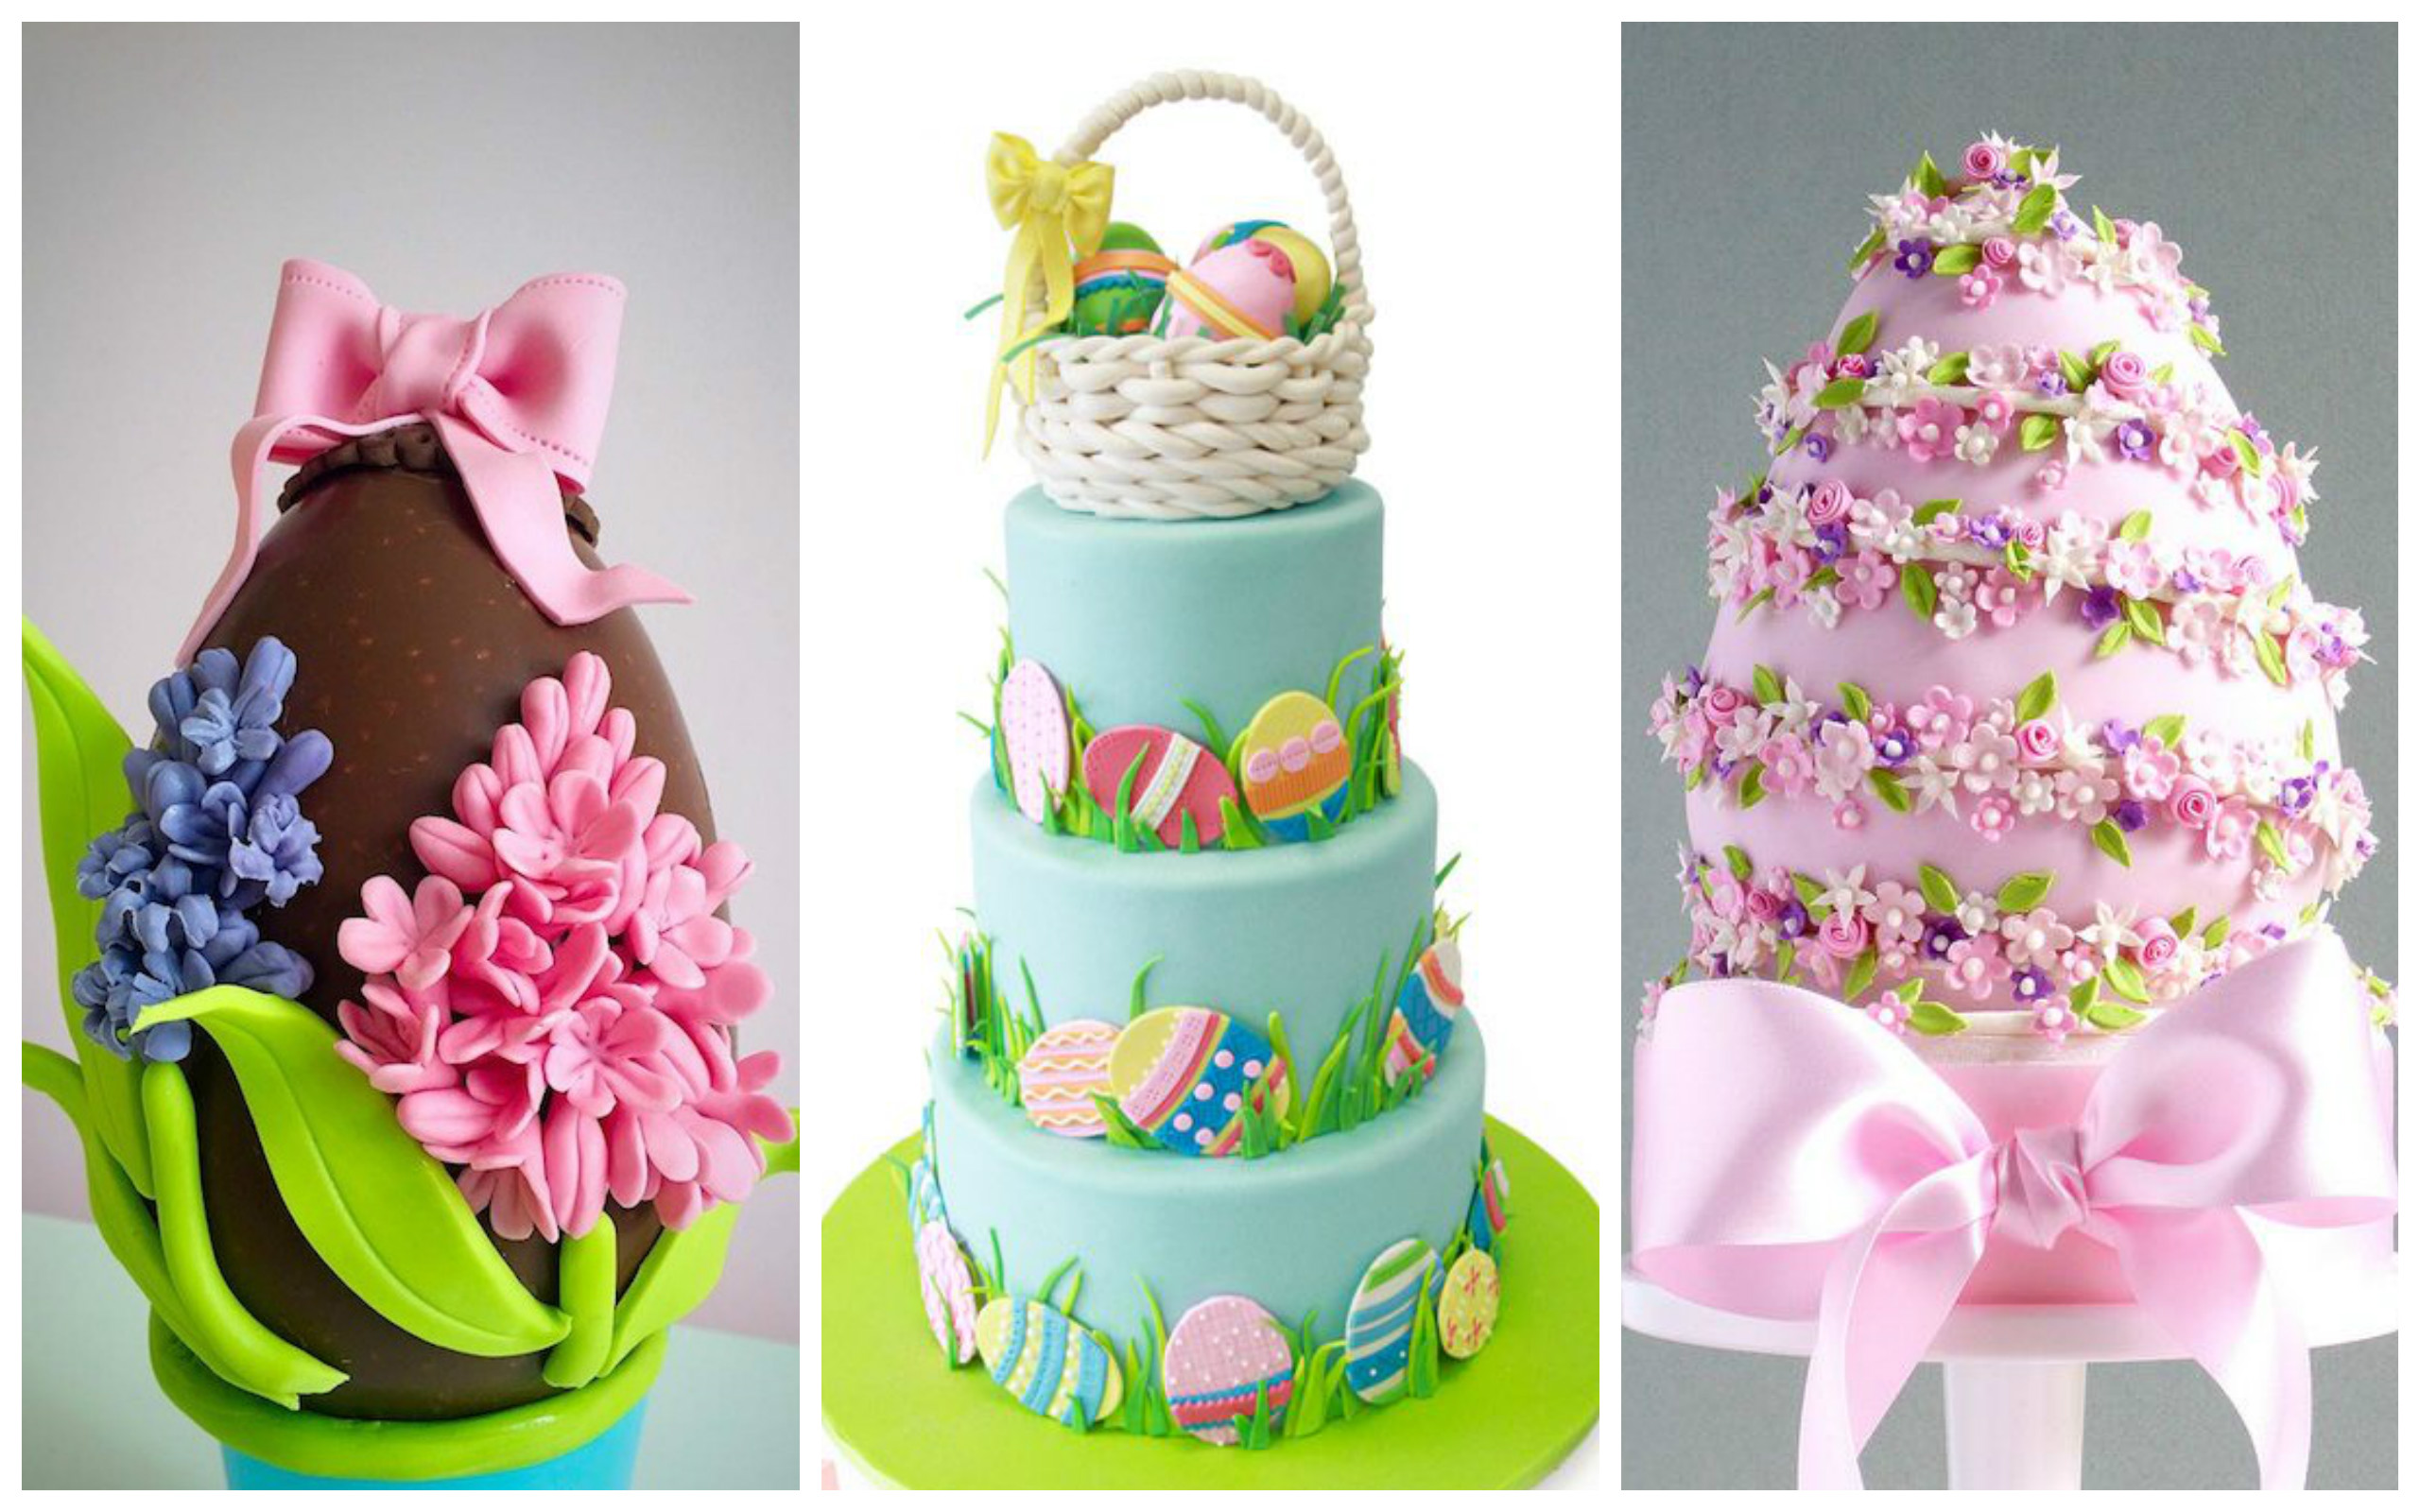 Easter Cakes - Cake Style